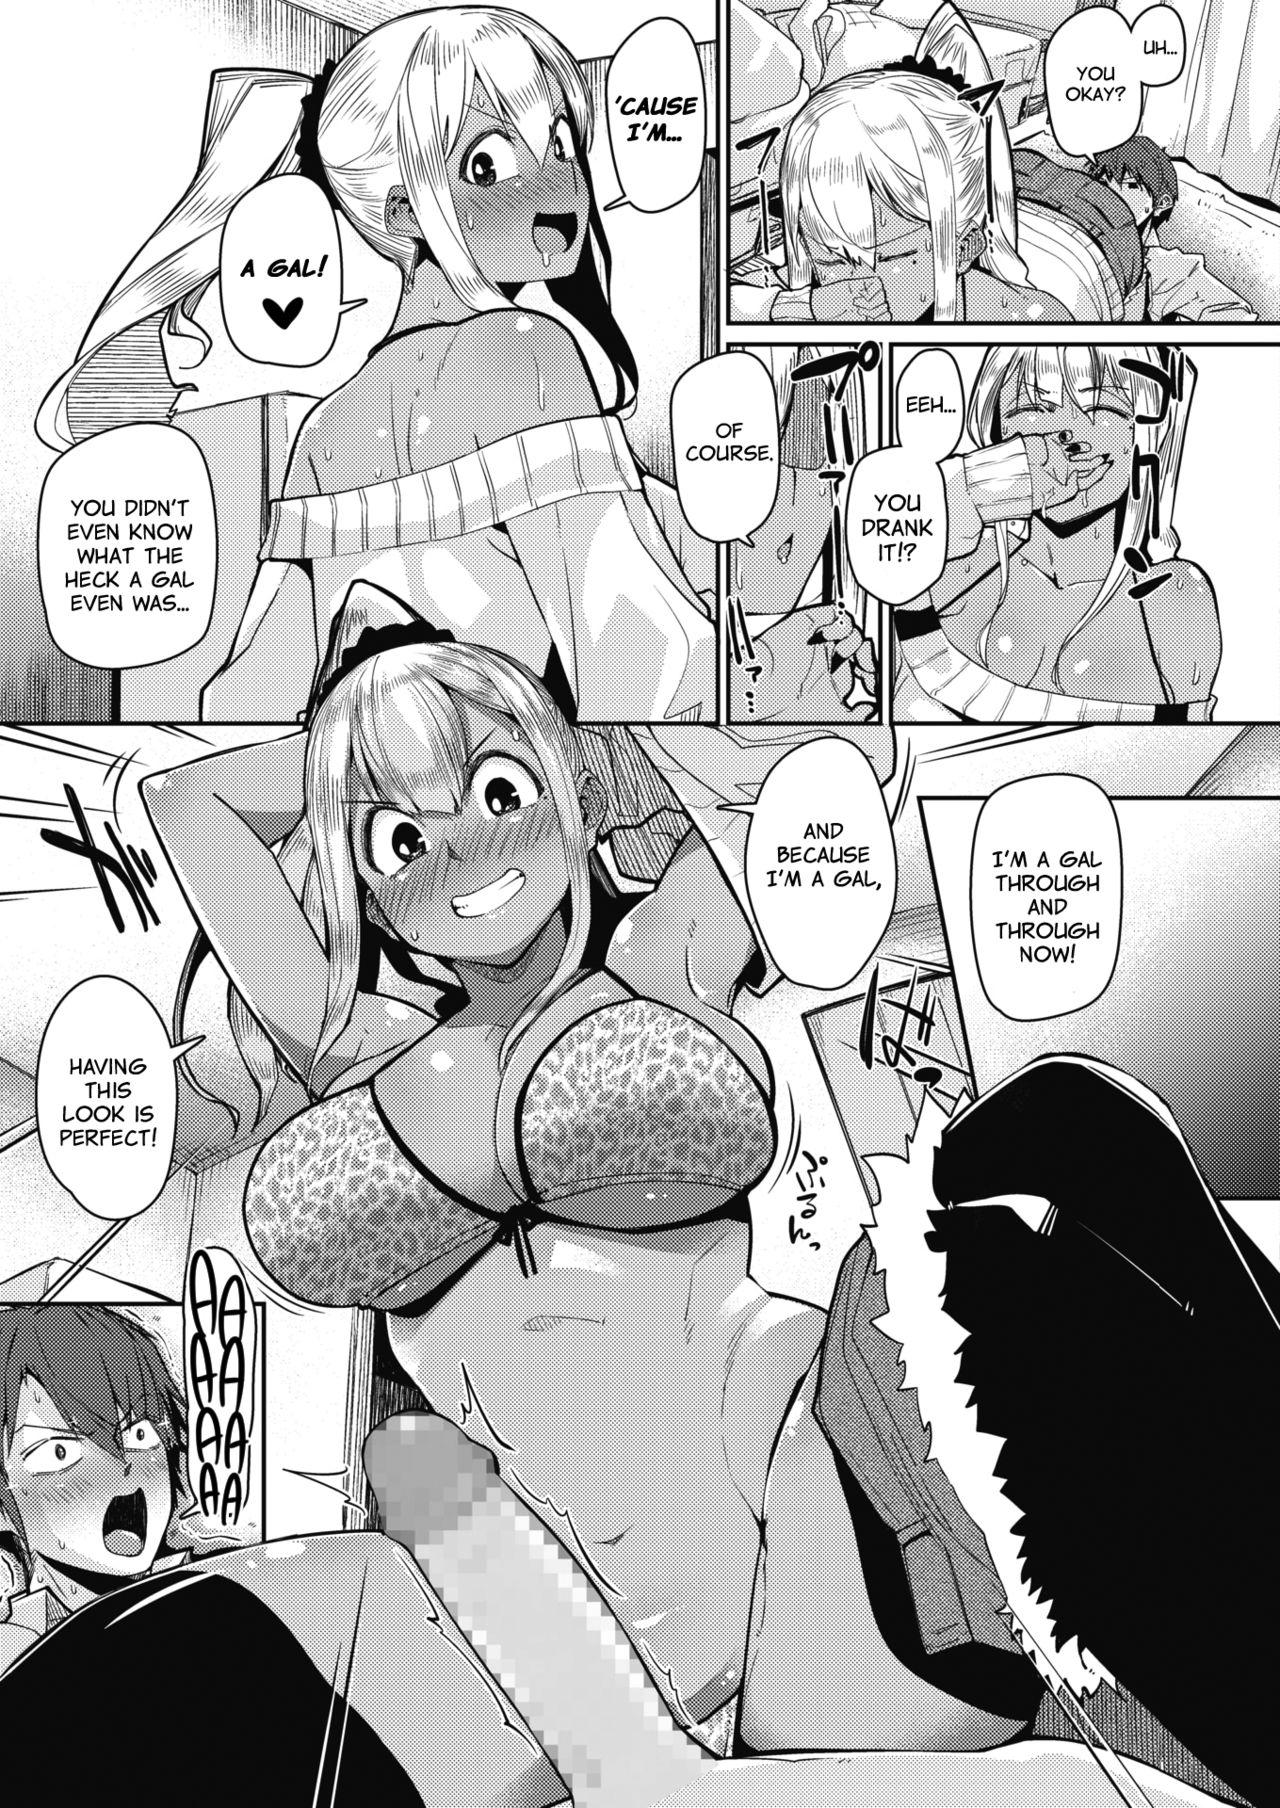 Big Pussy Gekkan "Za Bicchi" wo Mita Onna no Hannou ni Tsuite | About the Reaction of the Girl Who Saw "The Bitch Monthly" Smooth - Page 11